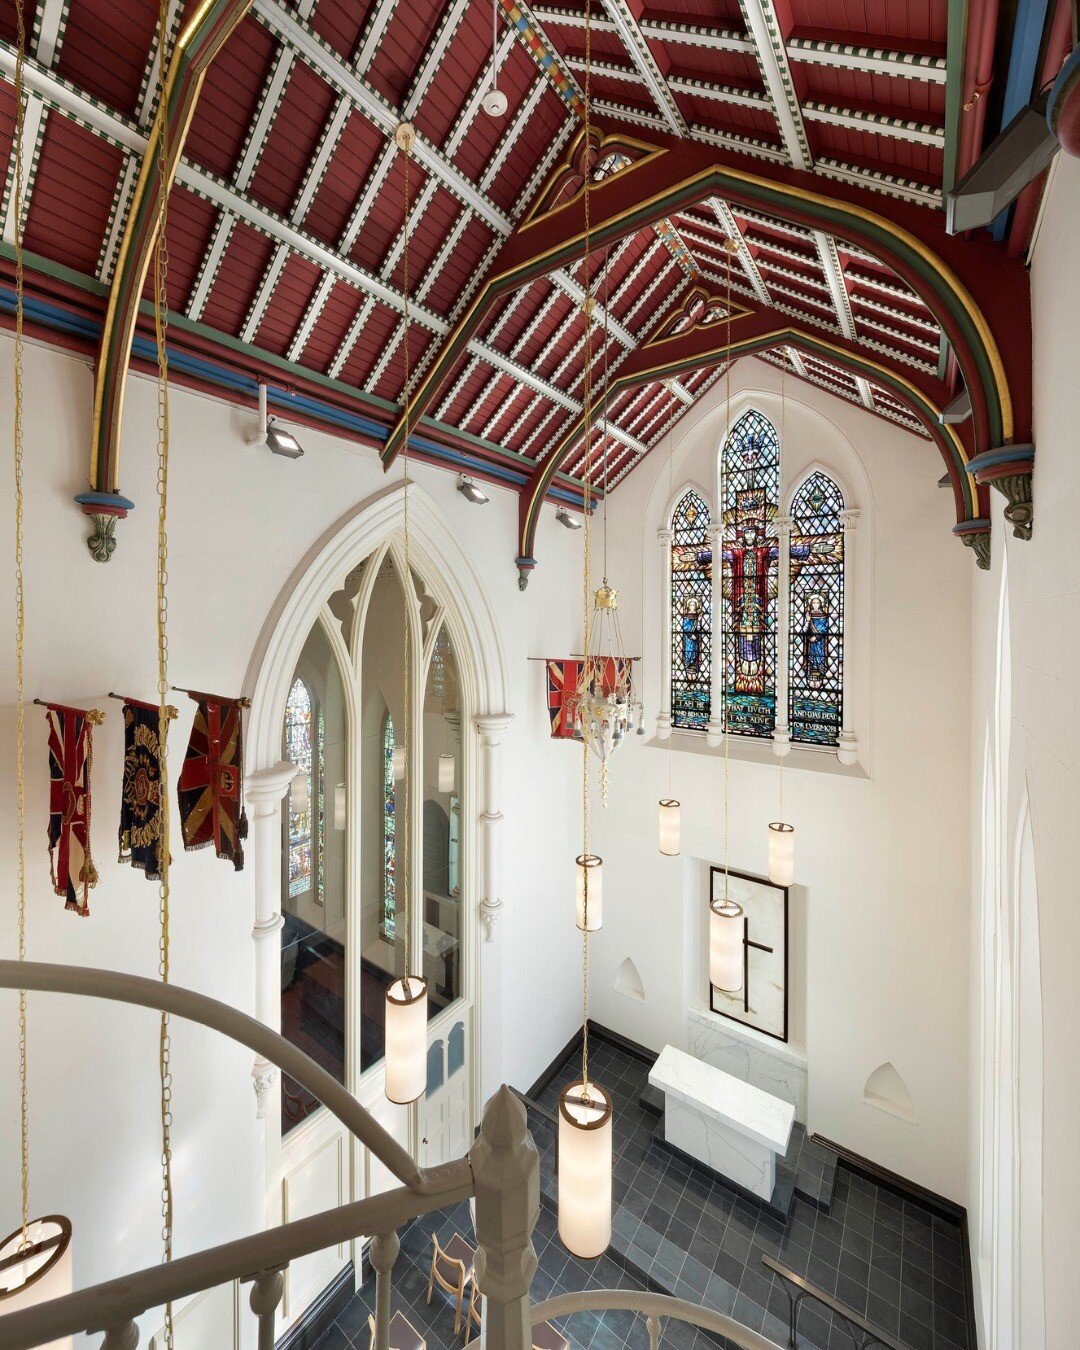 Though our work, using classic materials and features is our way to instill our projects with a sense of timelessness. With this project we take timelessness to a whole new level. We took a minimalist approach to update the St. George's Chapel featur